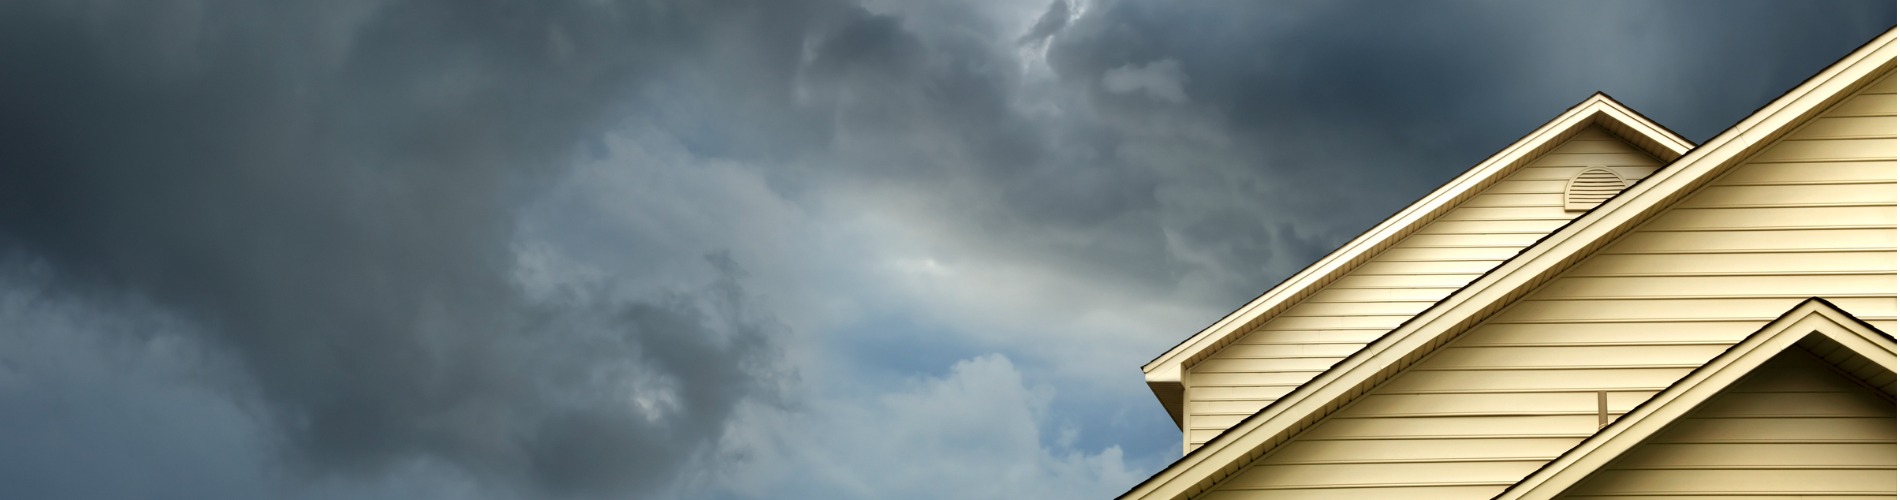 home-in-stormy-day 1900 x 500